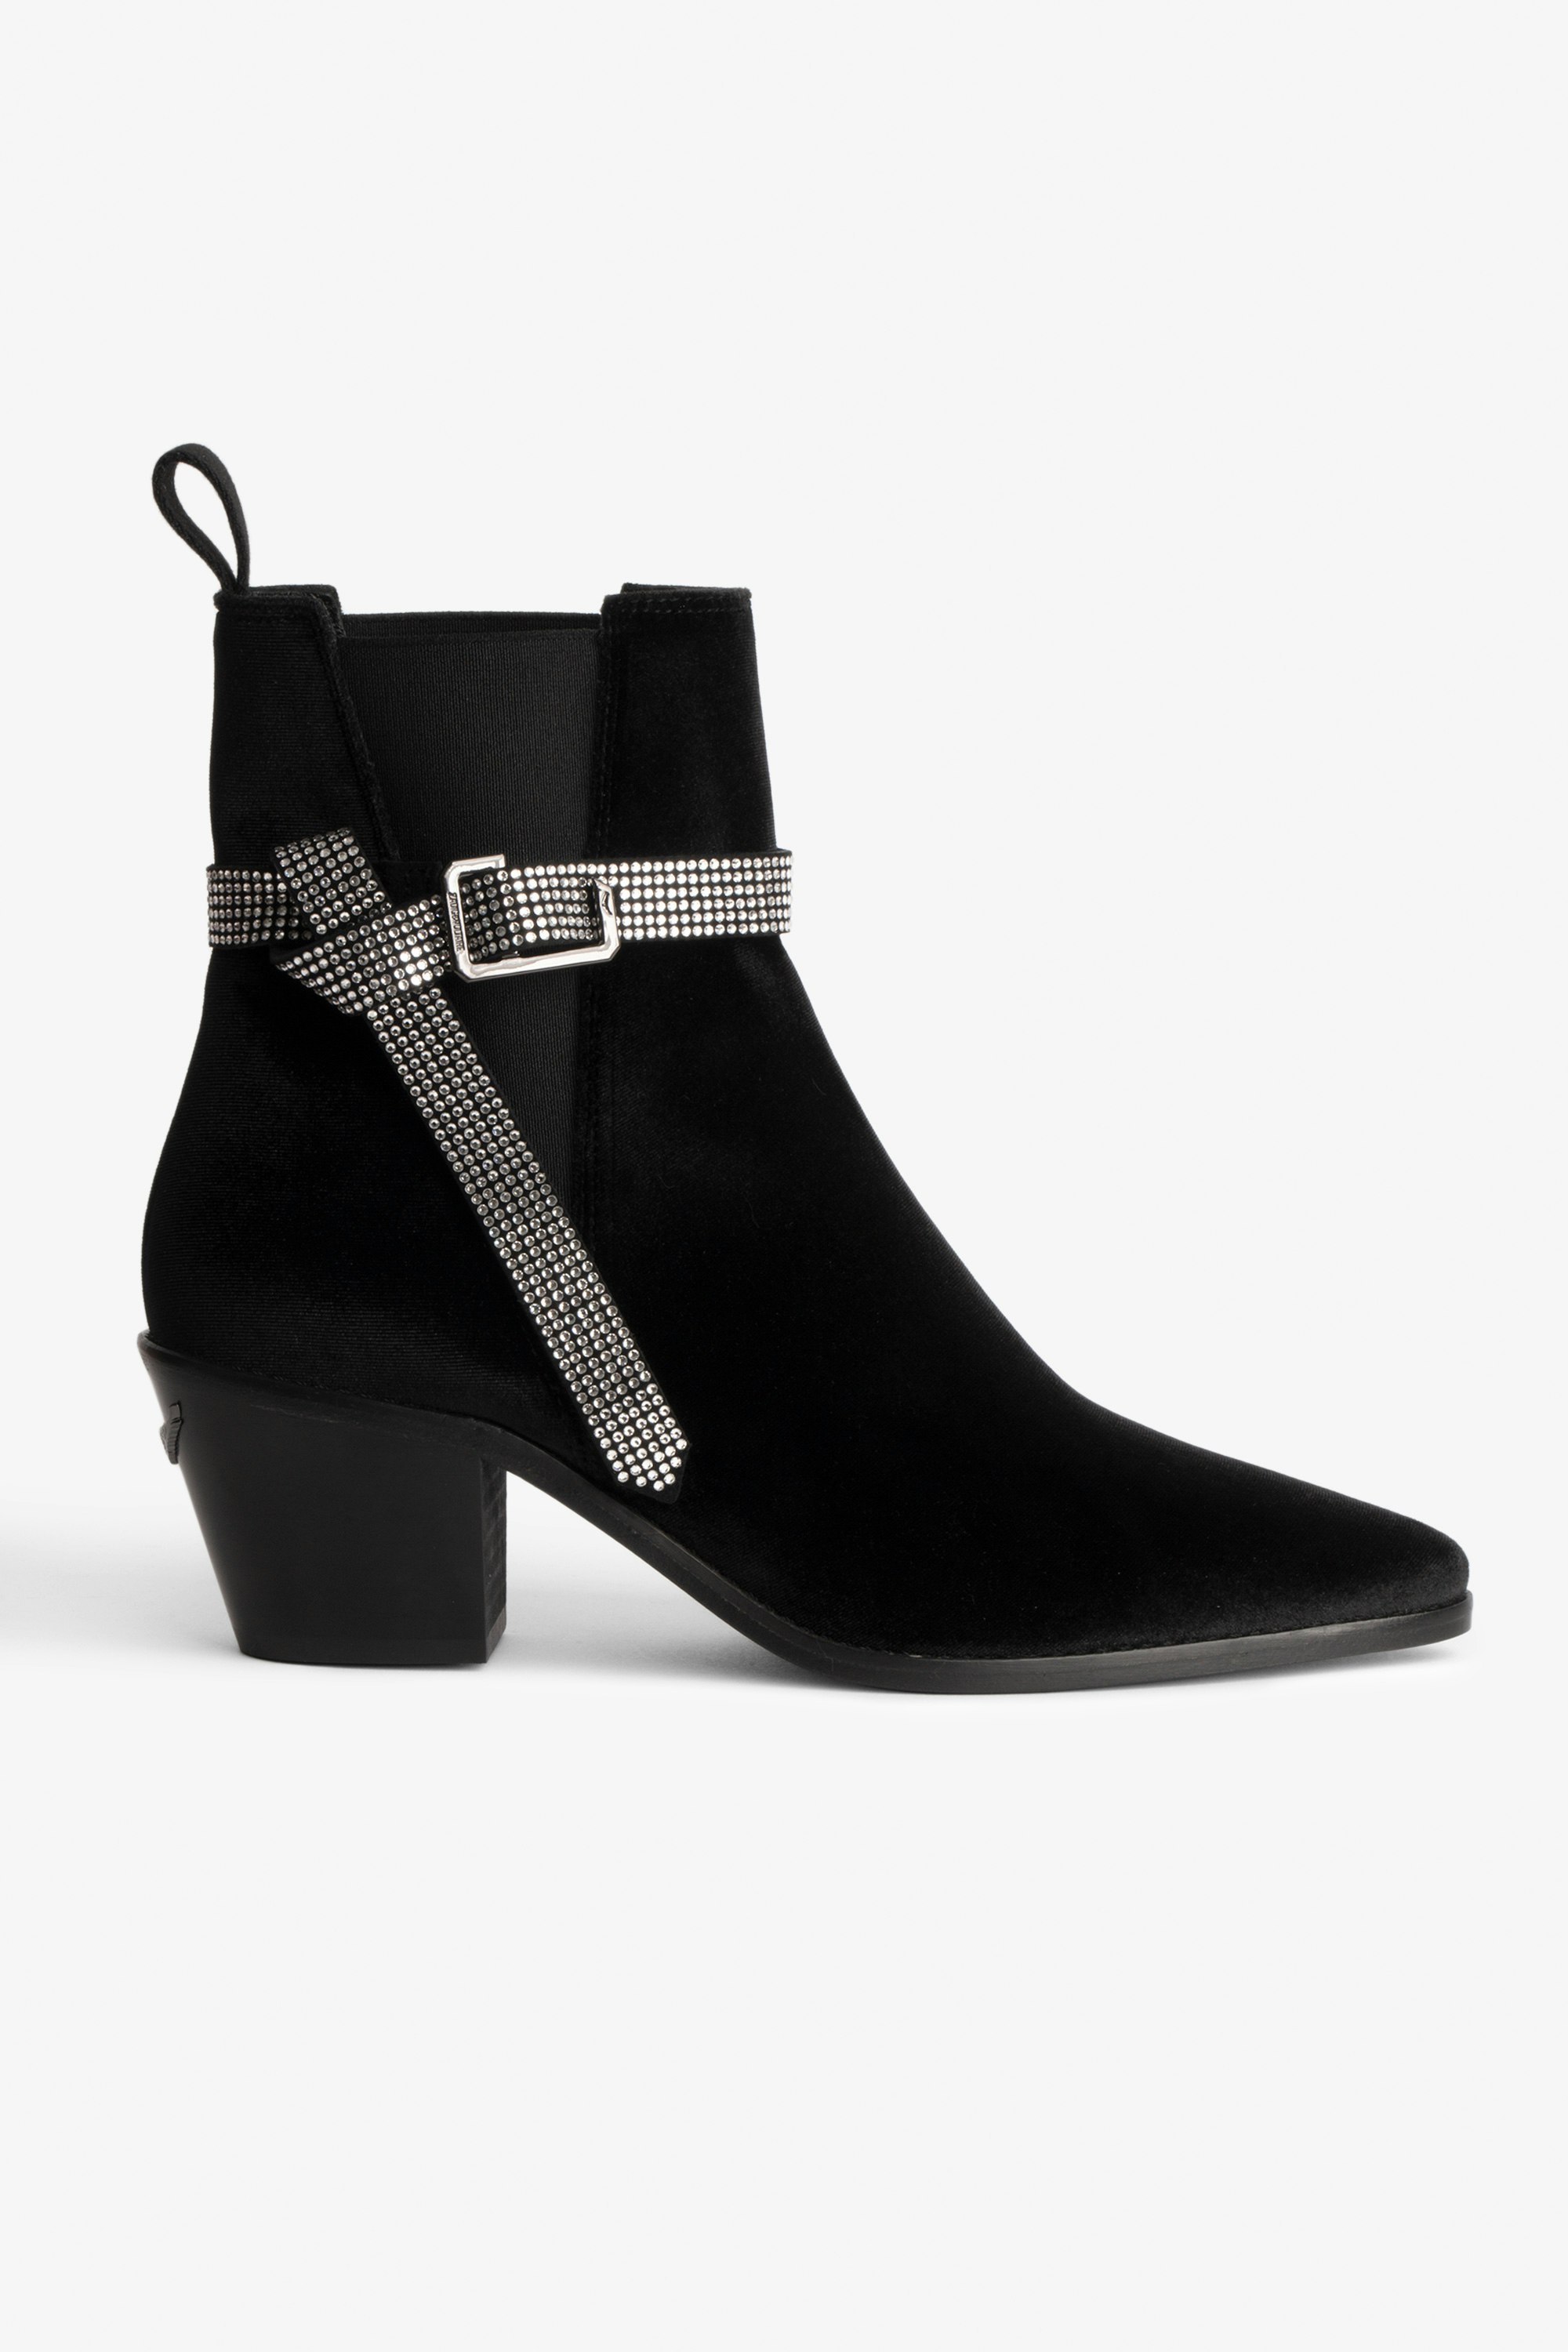 Tyler Cecilia Ankle Boots Women’s black suede ankle boots